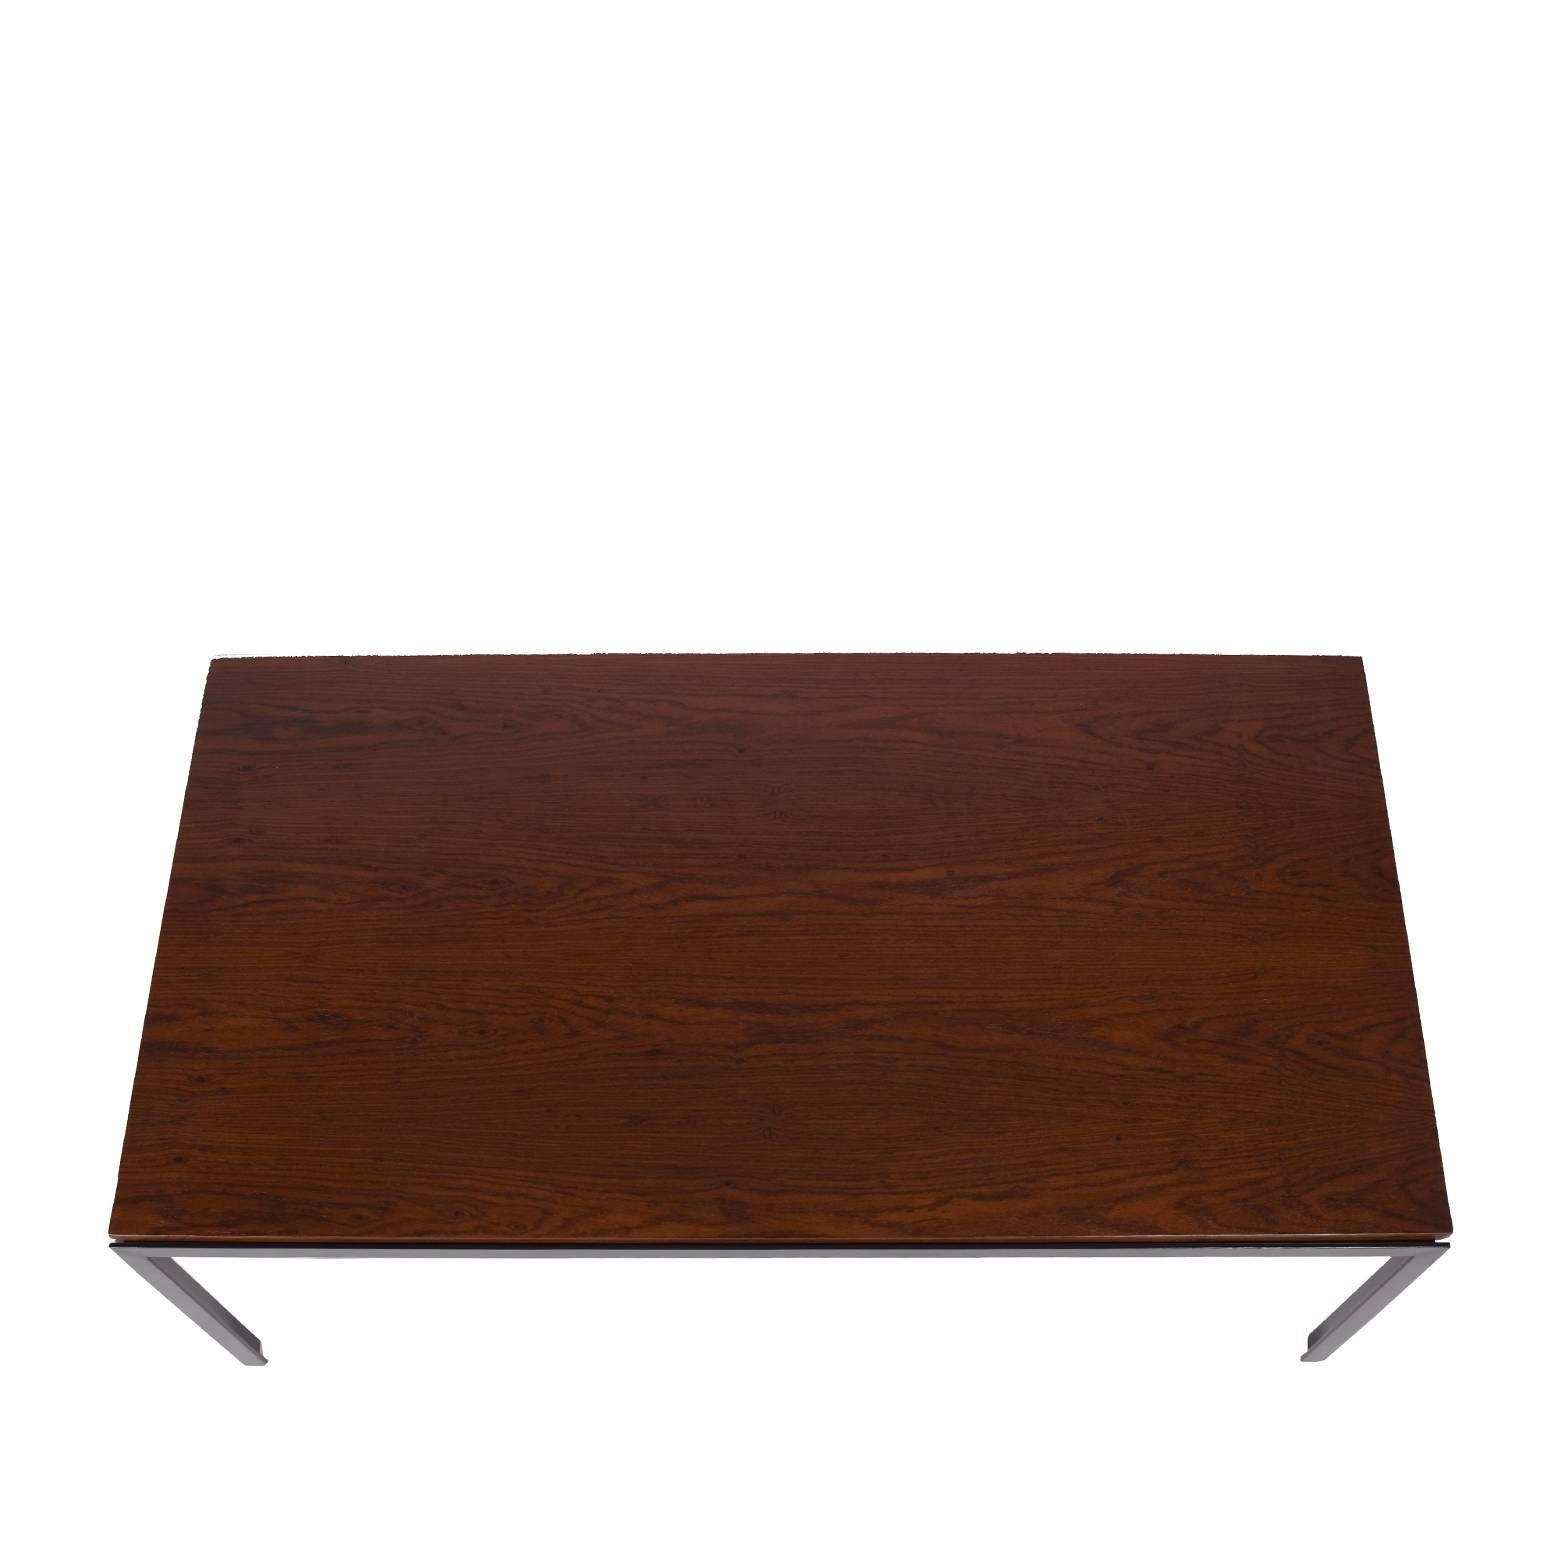 Rectangular table with black enamel painted black steel frame and rosewood top.
Made by Knoll.